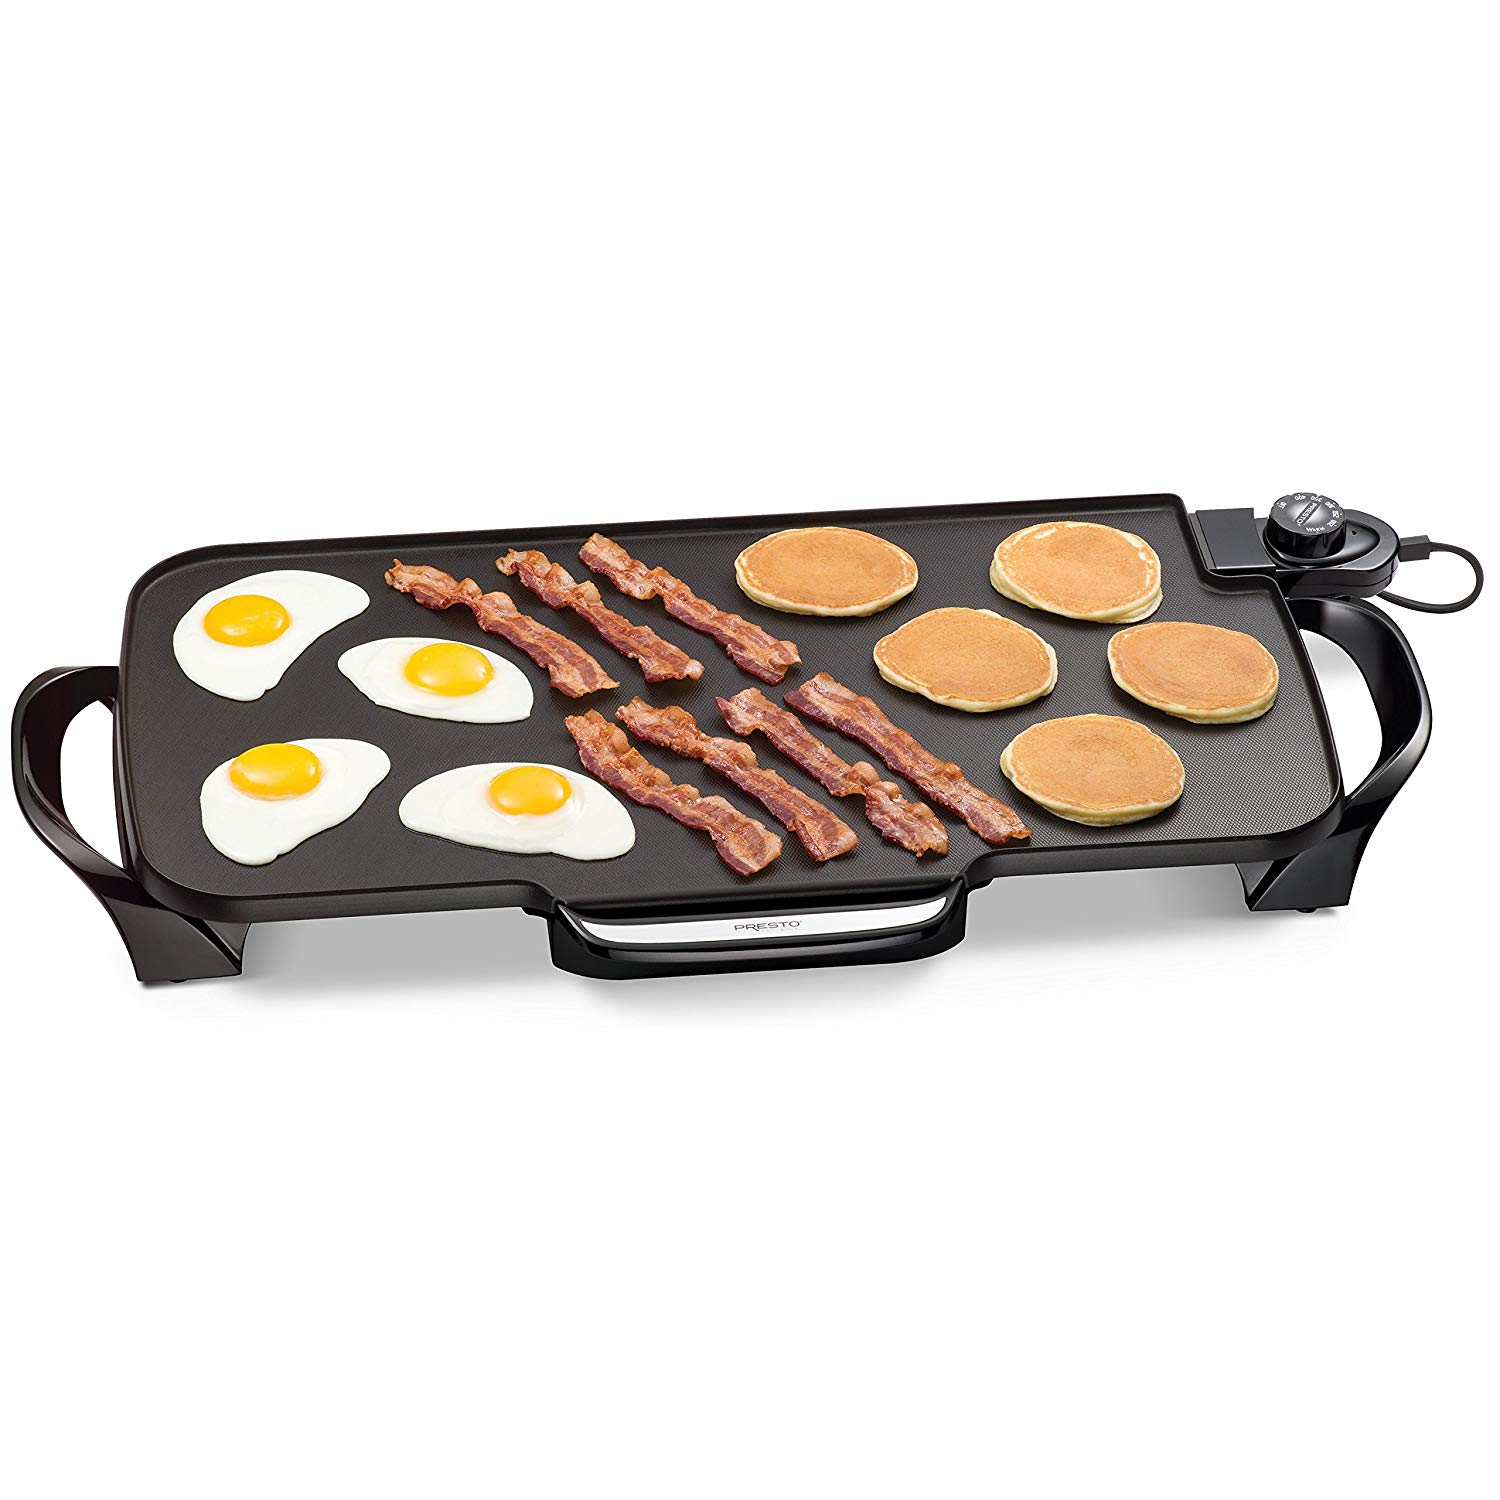 Review of Presto 07061 22-inch Electric Griddle With Removable Handles